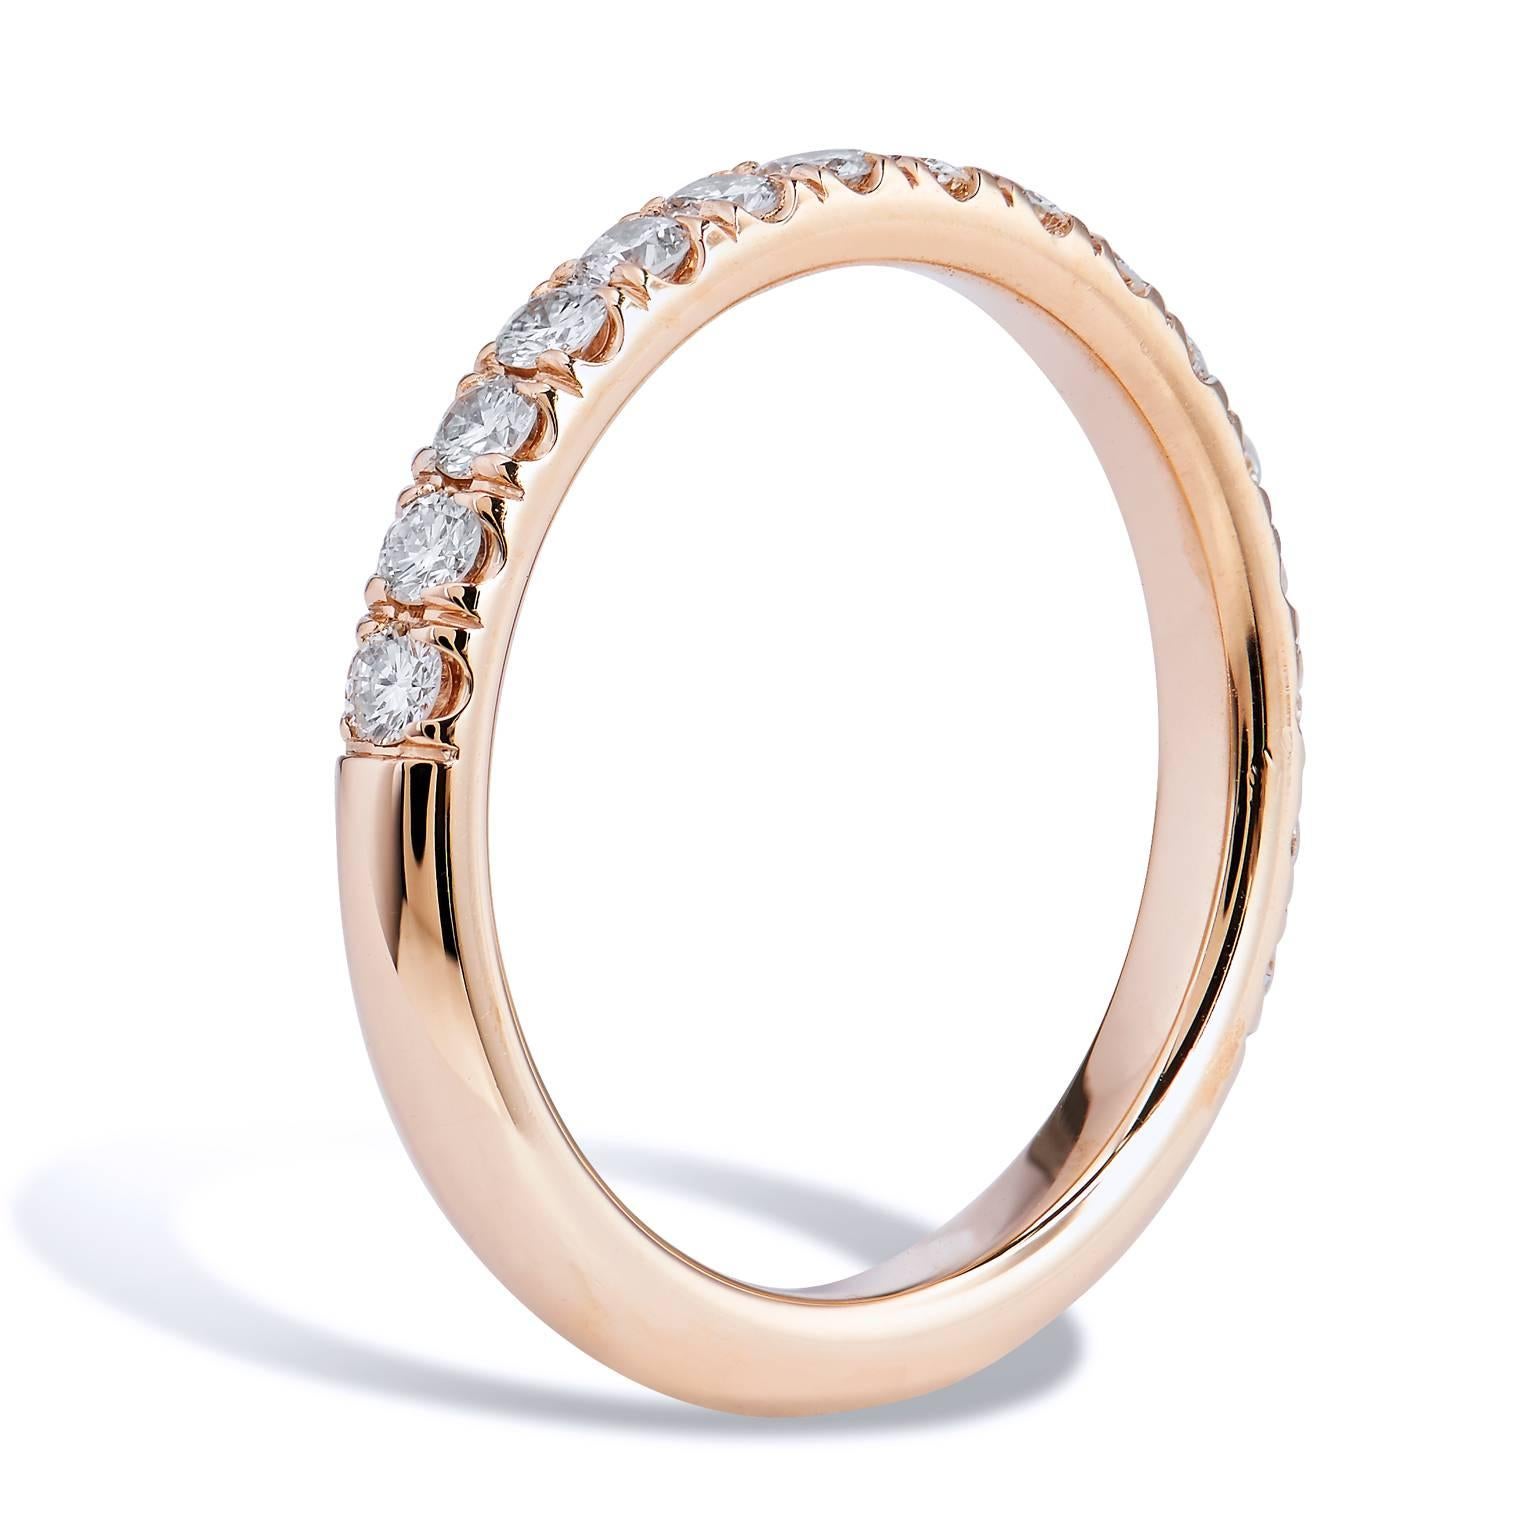 This diamond band ring features sixteen pieces of diamond pave set with a total weight of 0.44 carat (F/G/VS). Affixed to an 18 karat rose gold band, the split V detail, opens the eye, and allows the ring to pop with light.